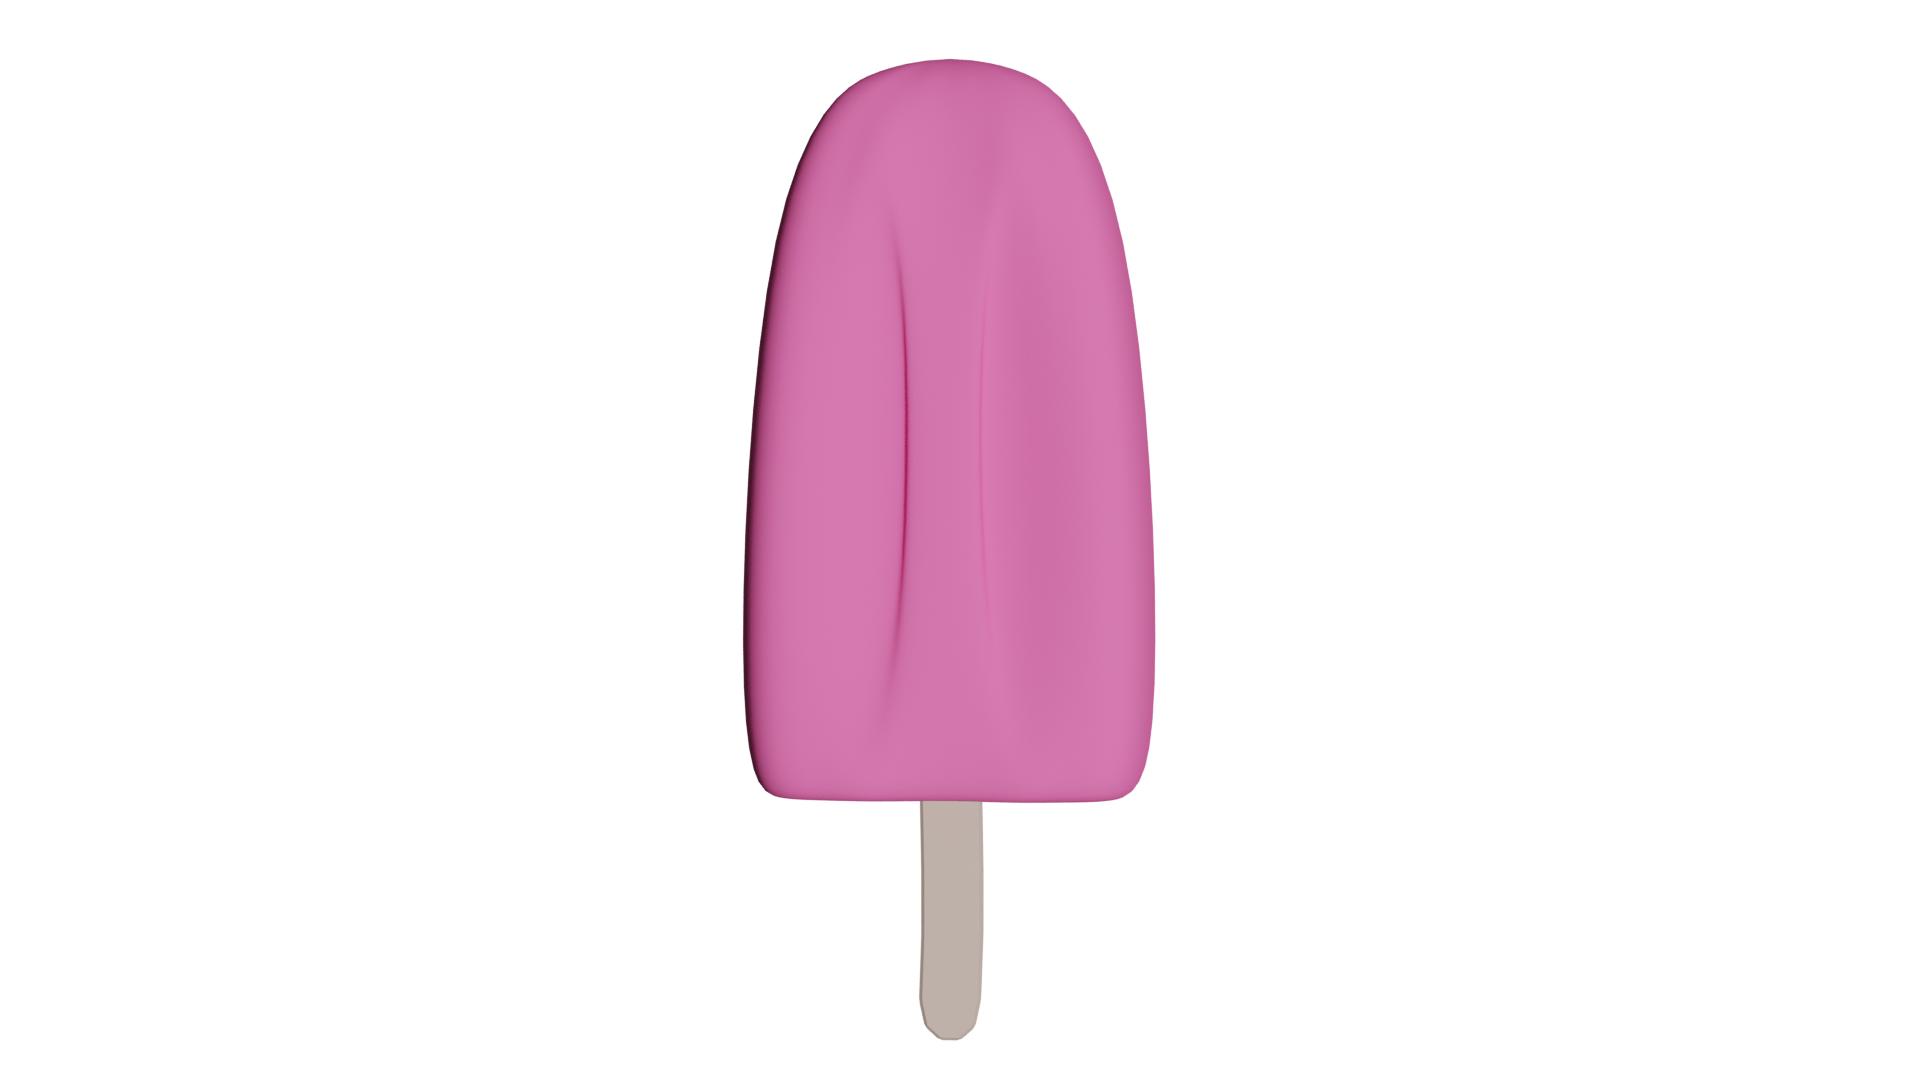 File:Popsicle  - Wikimedia Commons